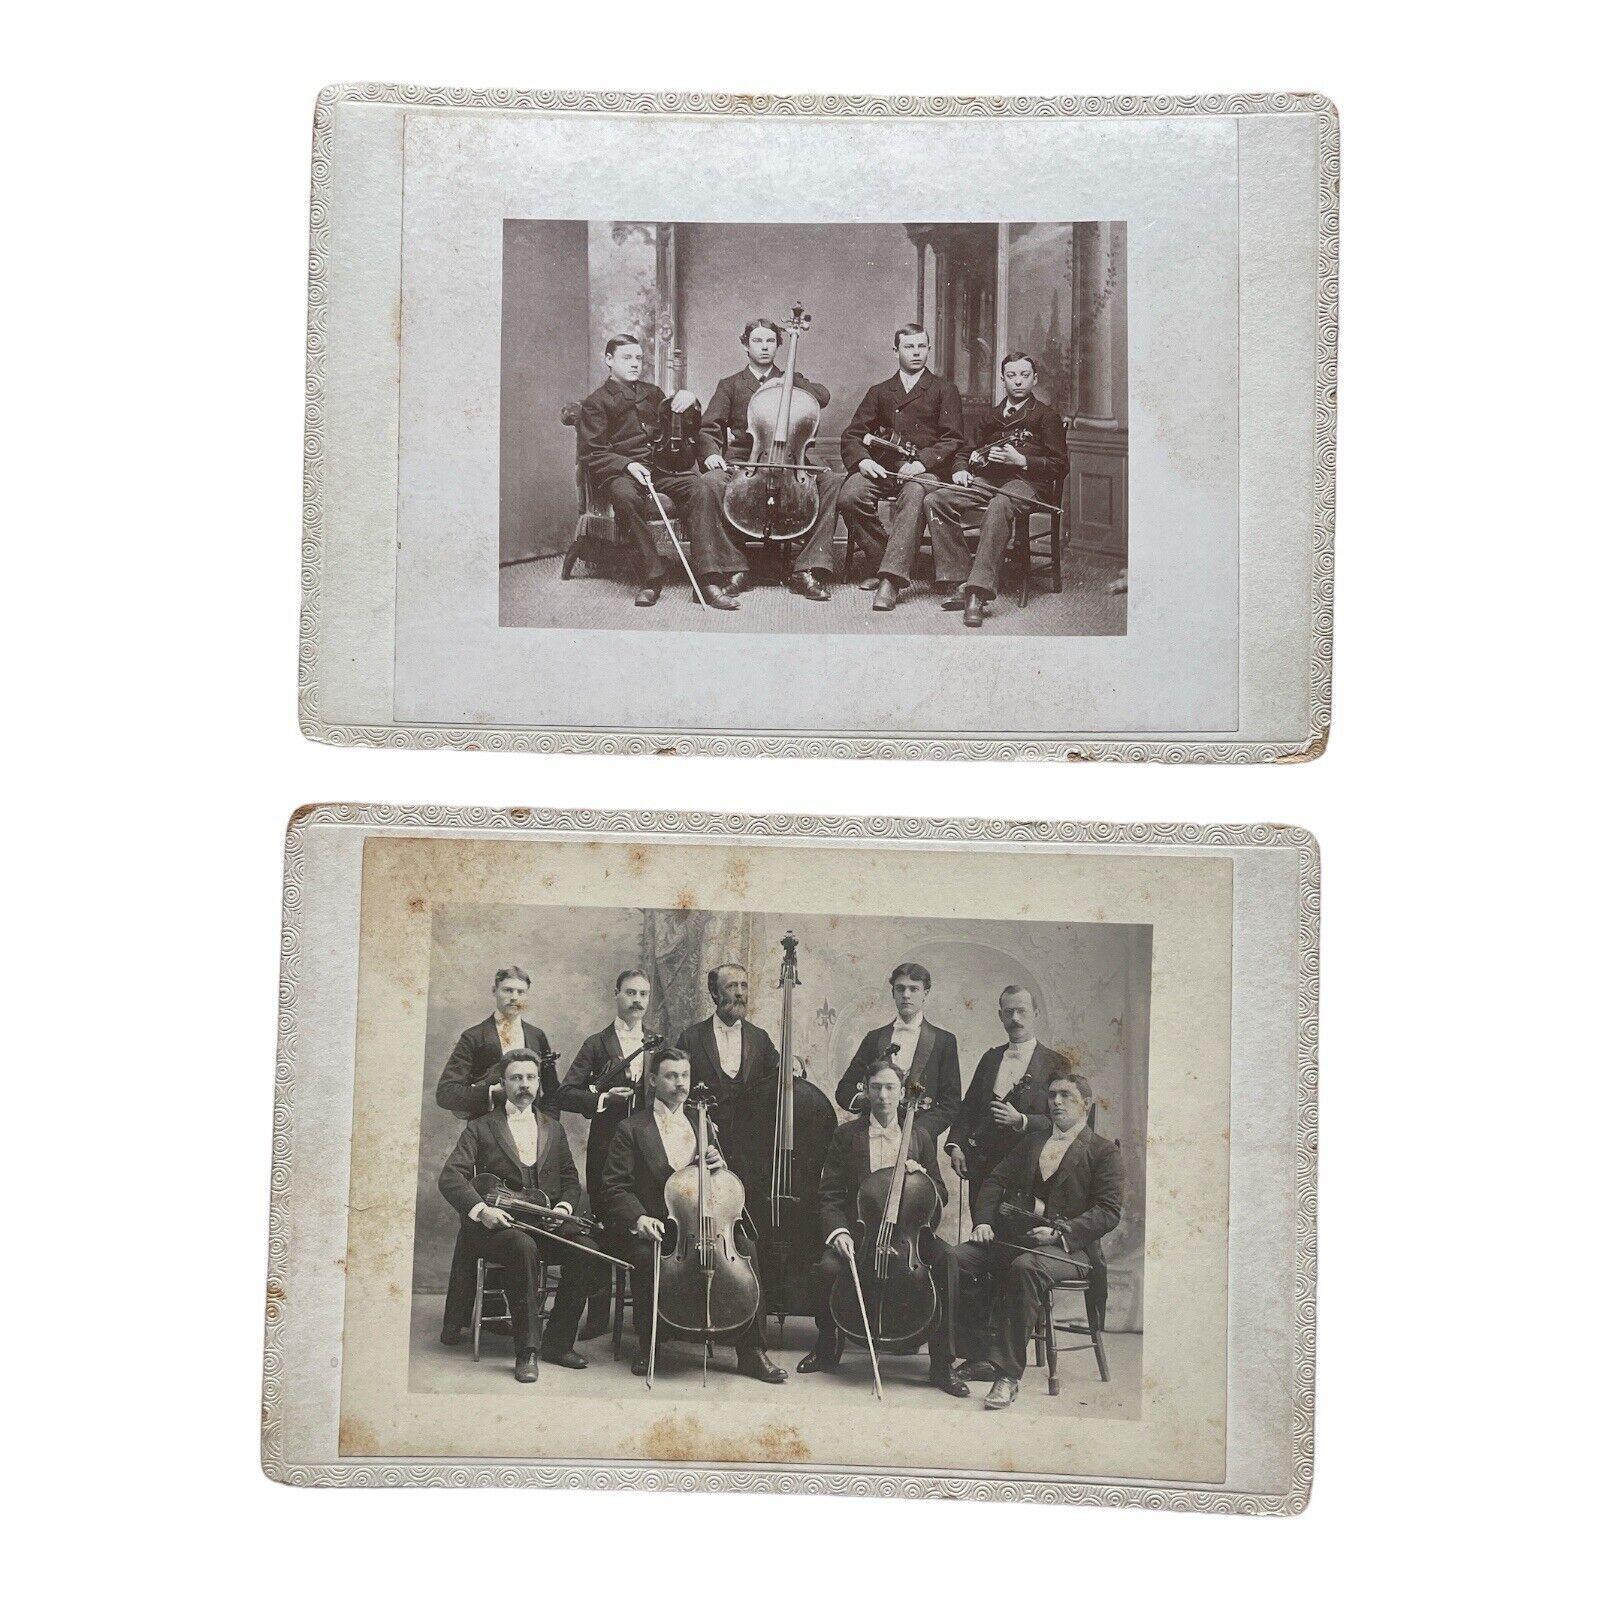 Two Remarkable Antique Photos of Musicians - One Dated 1879